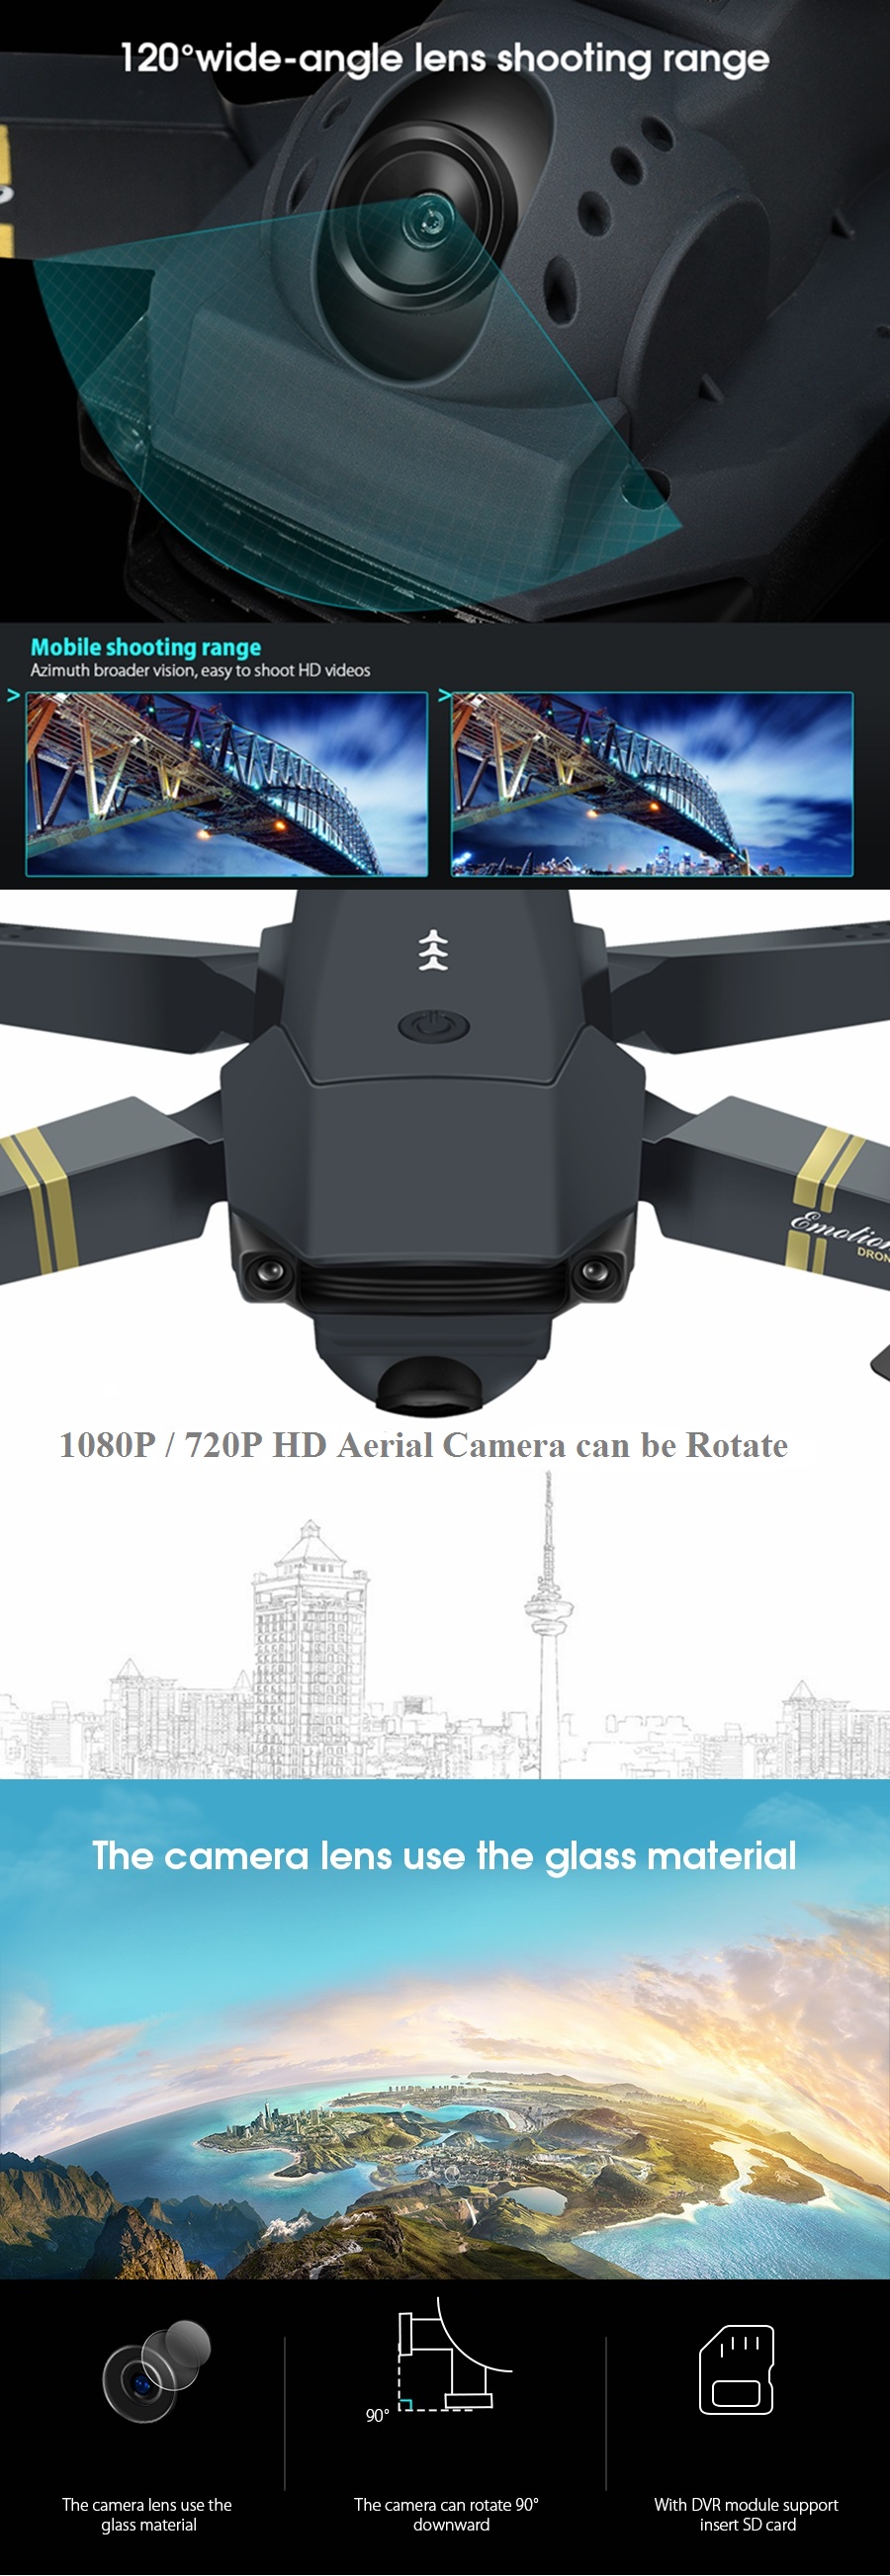 Eachine-E58-WIFI-FPV-With-720P1080P-HD-Wide-Angle-Camera-High-Hold-Mode-Foldable-RC-Drone-Quadcopter-1212232-4